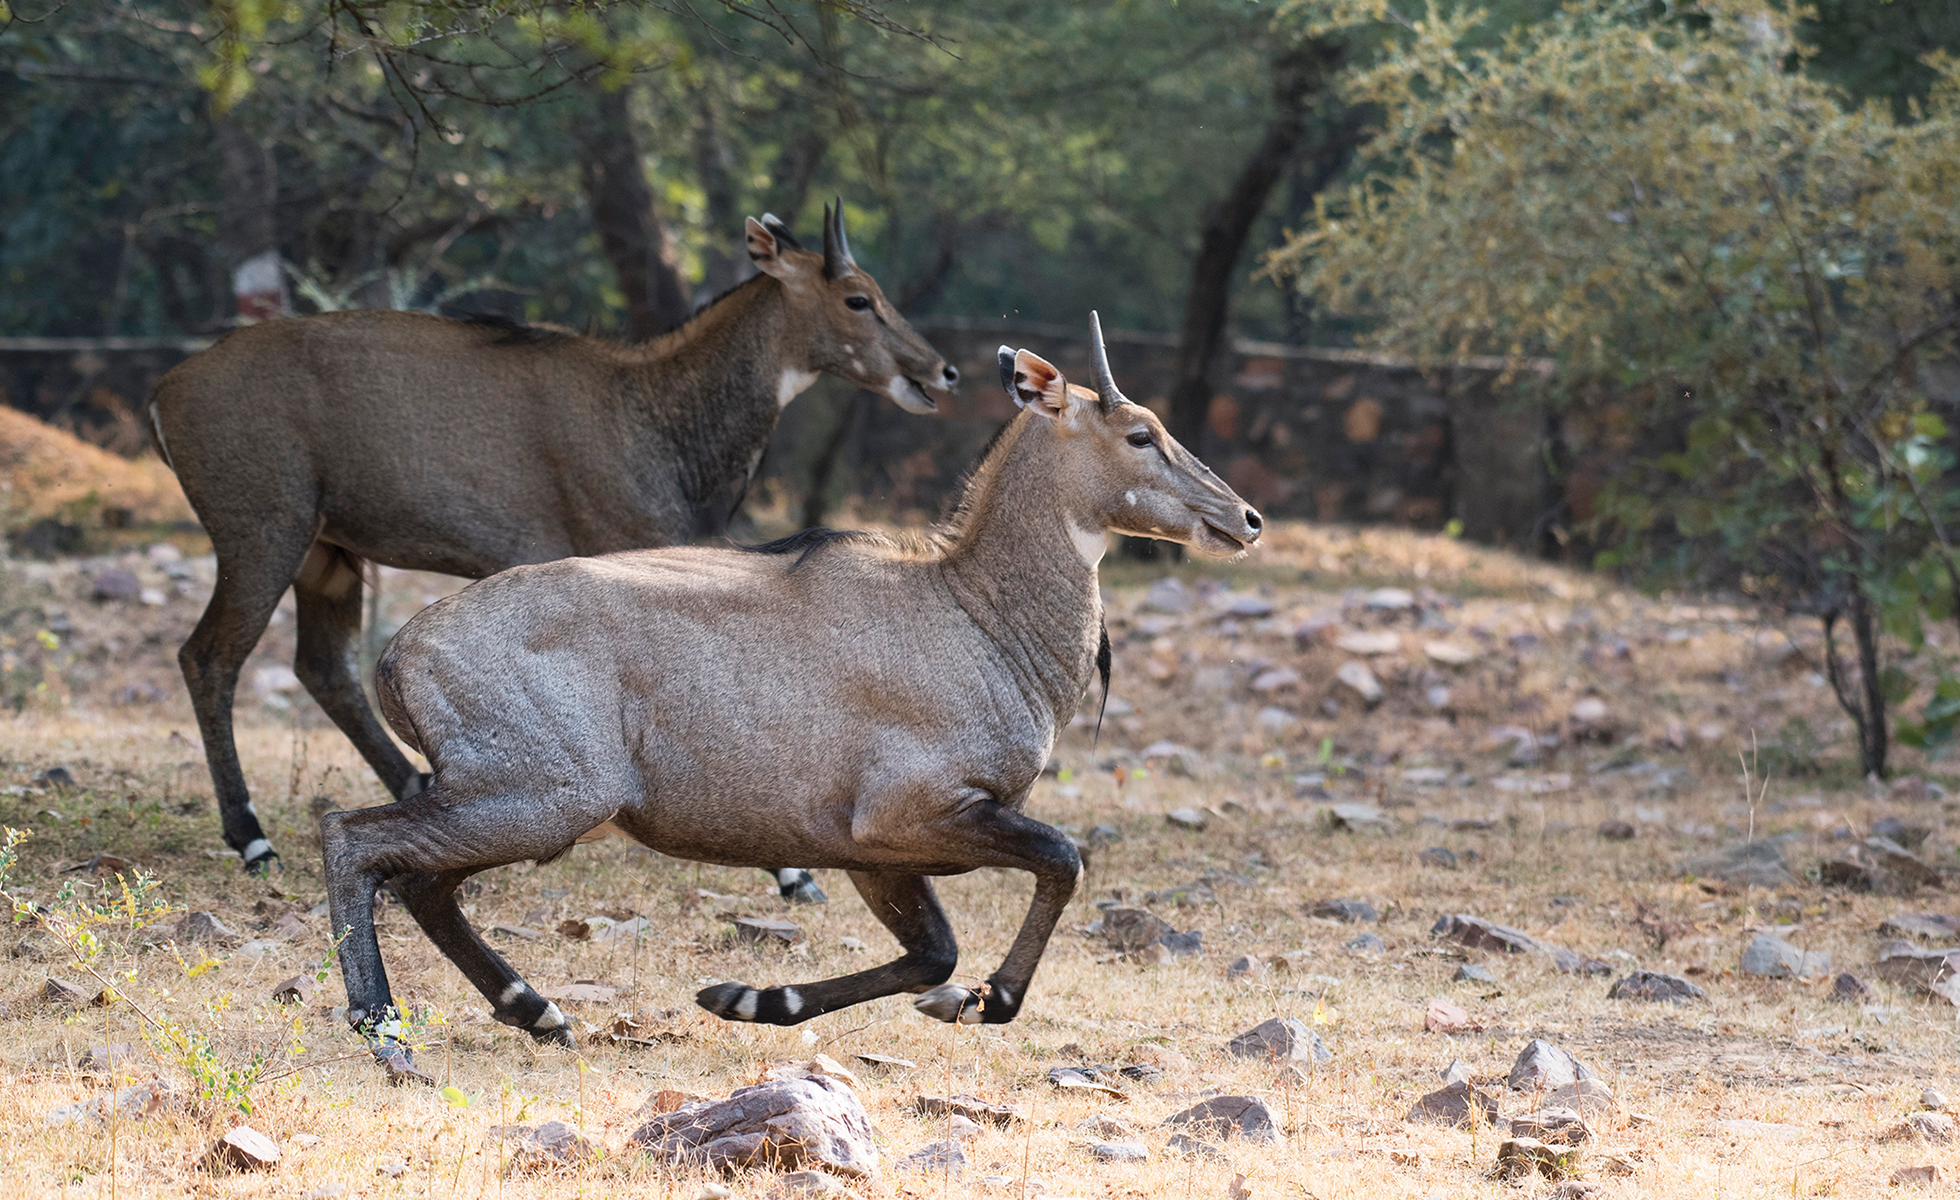 The King Ranch pioneered the release of nilgai in Texas, according to the Texas State Historical Association.